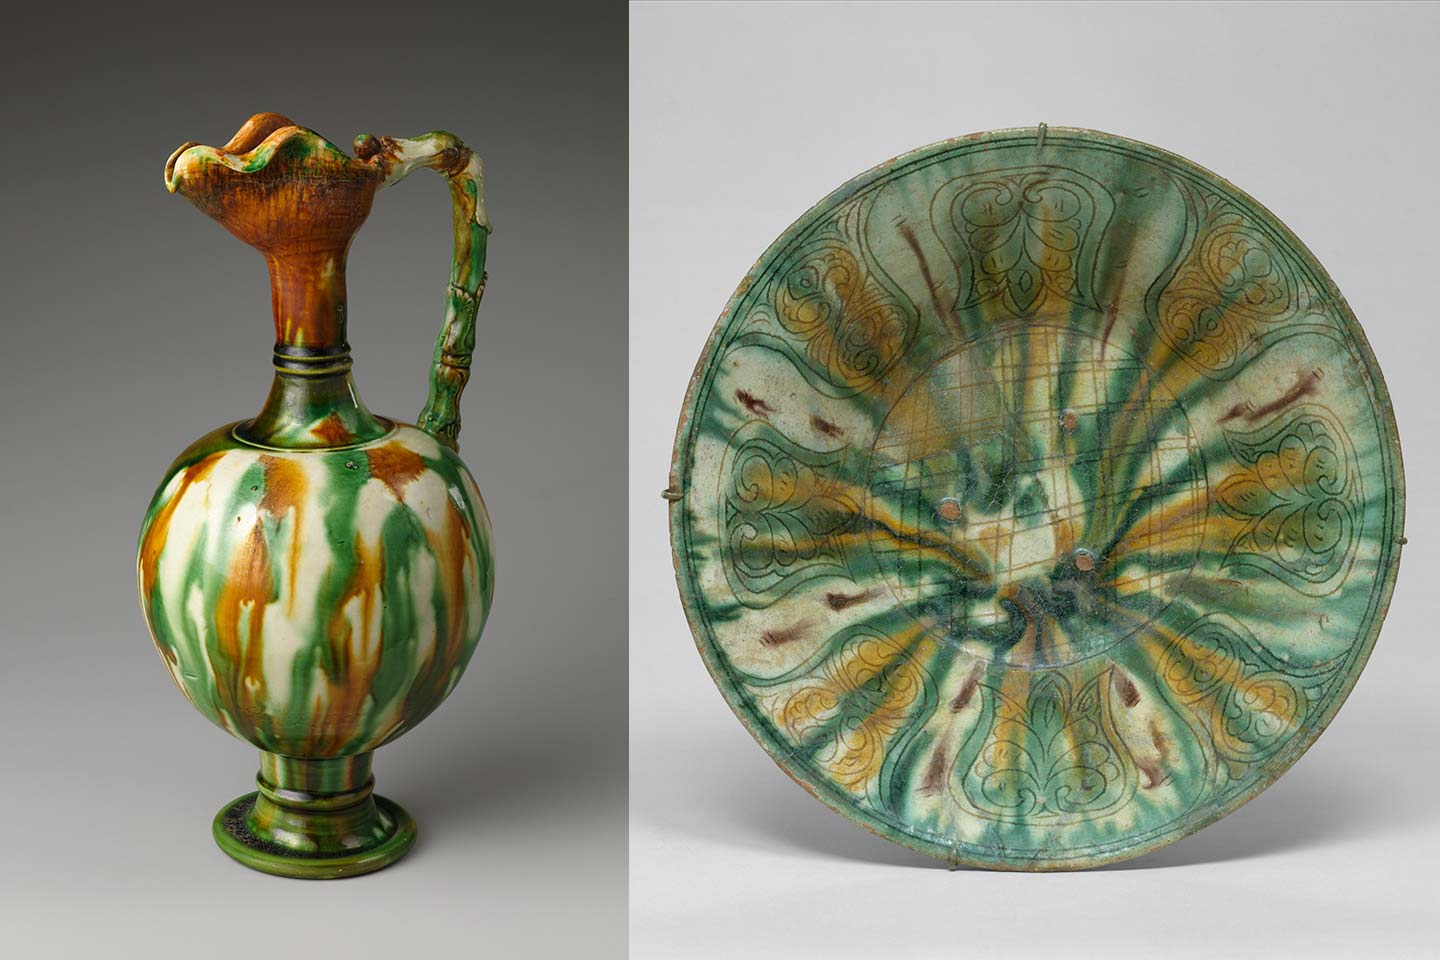 7th-century Chinese Ewer and 10th-century Iranian bowl with similar green and brown decoration